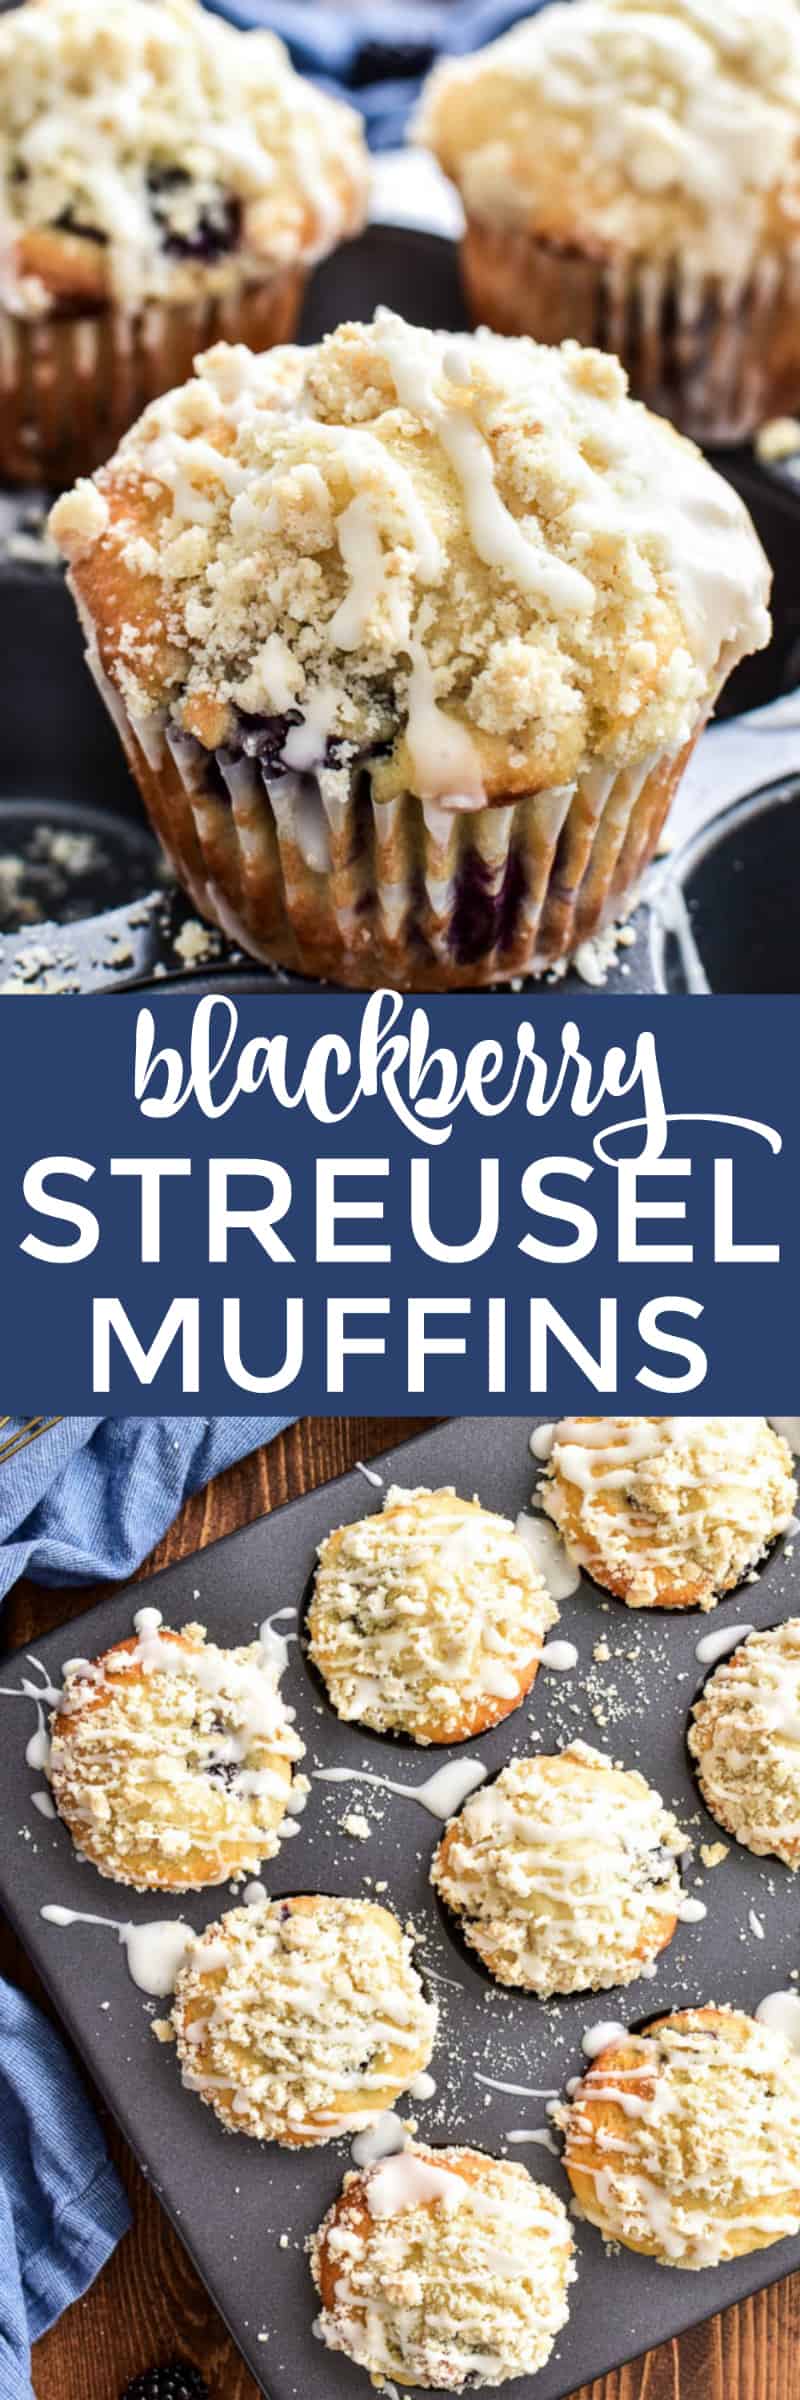 Collage image of Blackberry Streusel Muffins